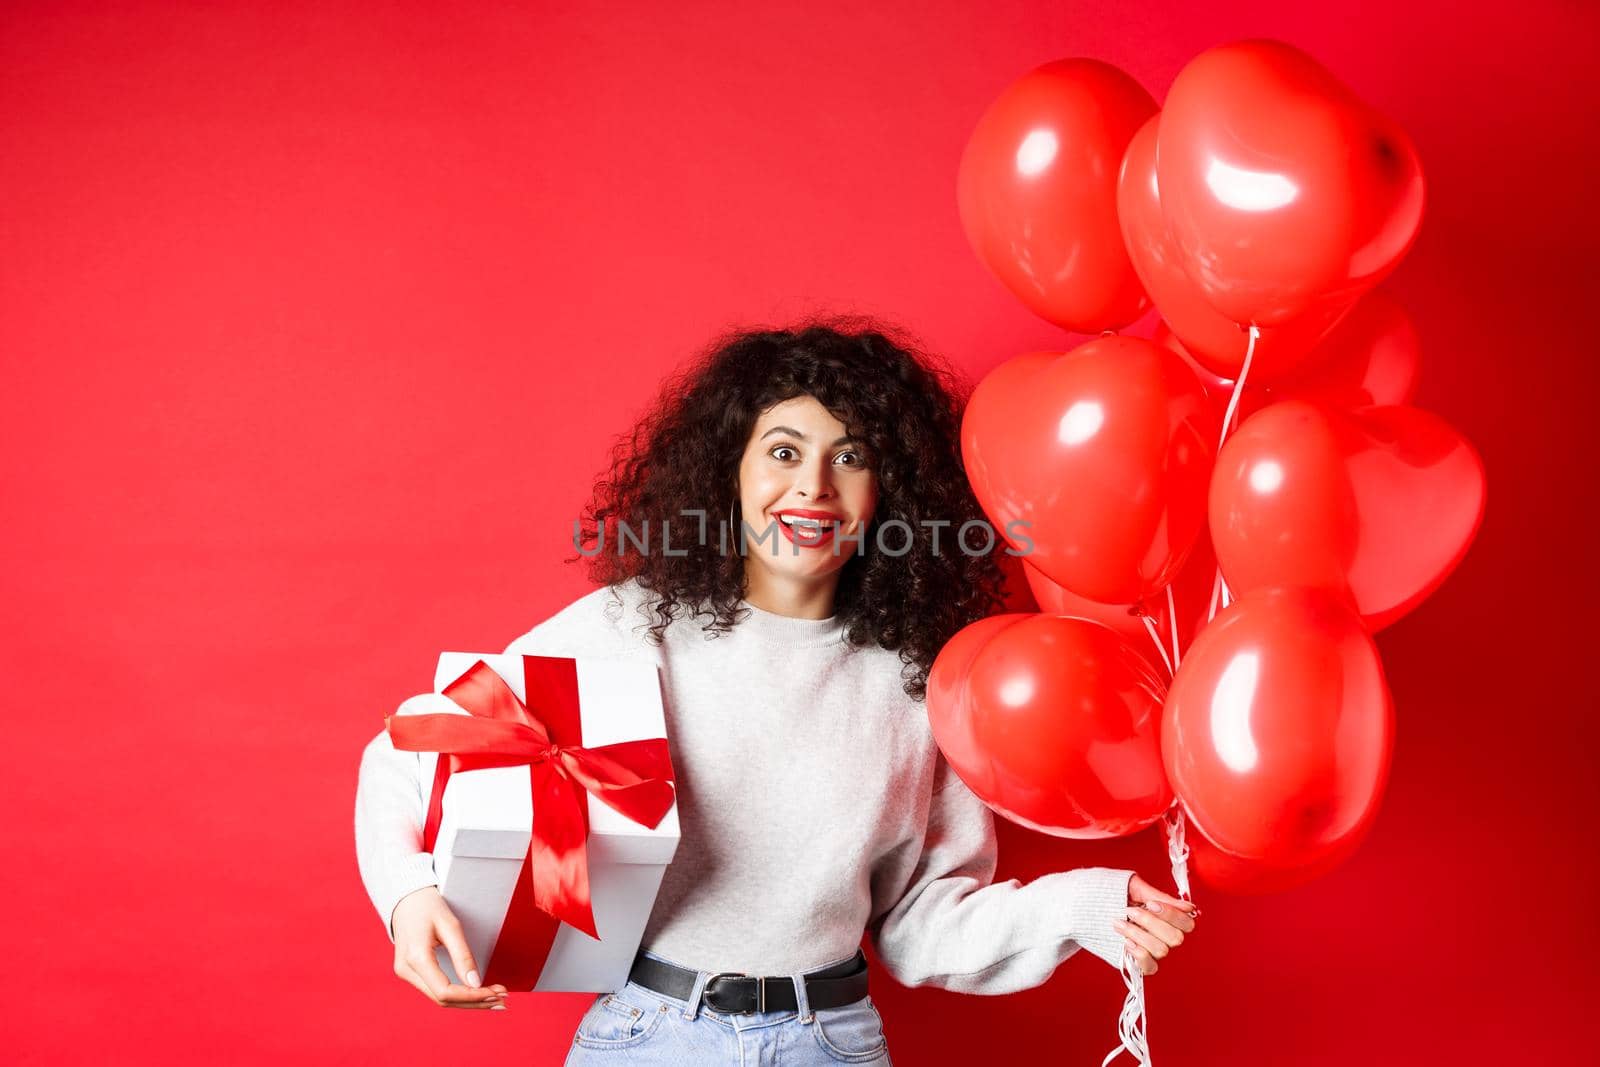 Excited beautiful woman celebrating Valentines day holiday, holding gift box and romantic heart balloons, looking surprised at camera, standing over red background.